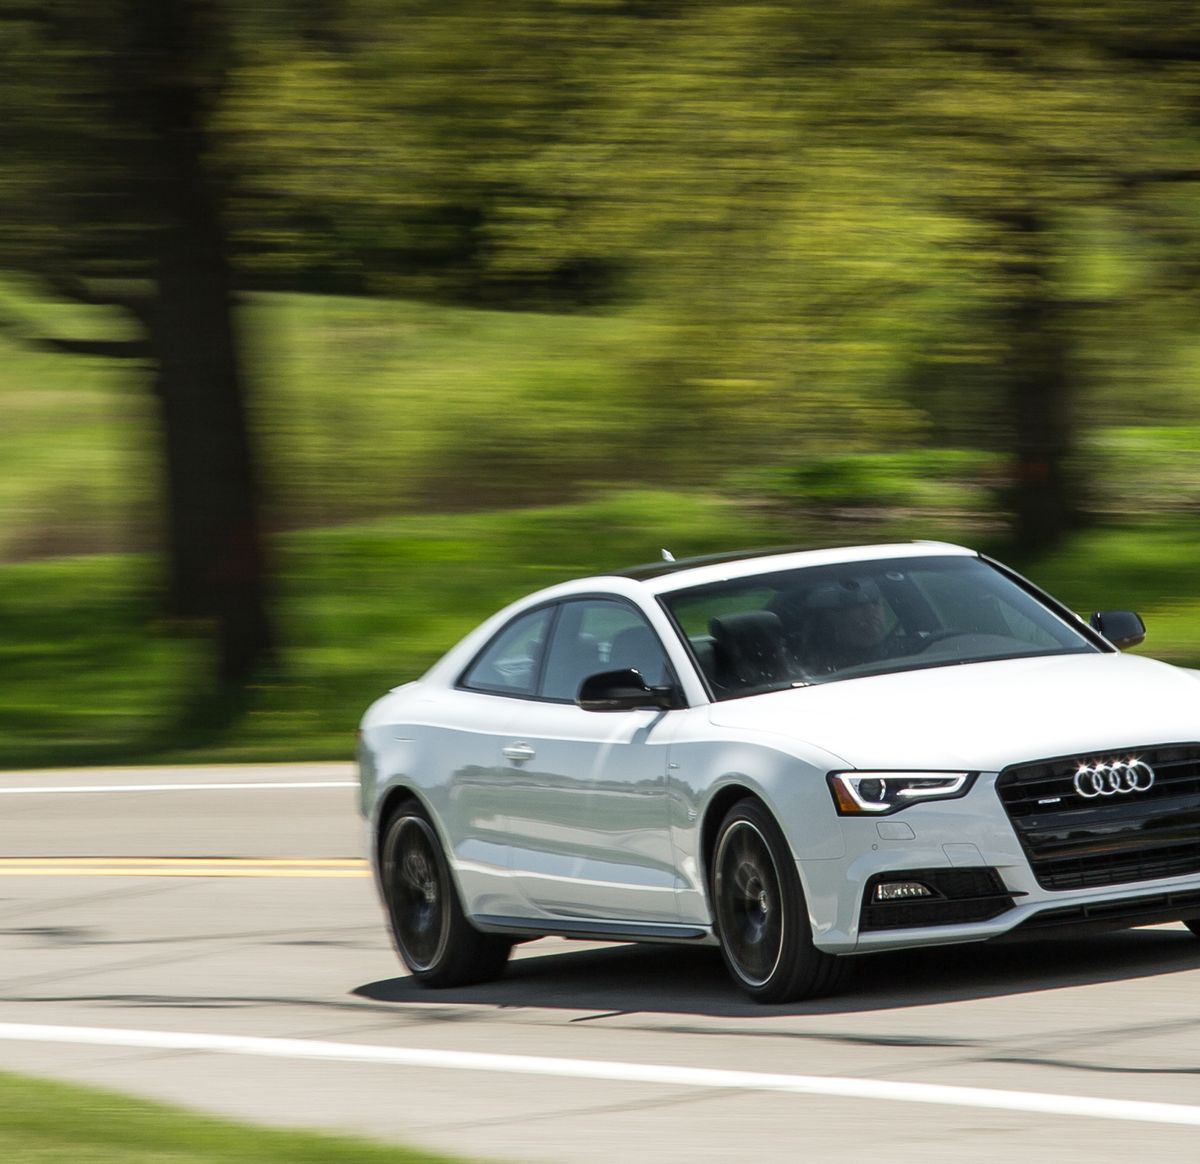 pijpleiding mooi Universeel Tested: 2016 Audi A5 S-line Automatic